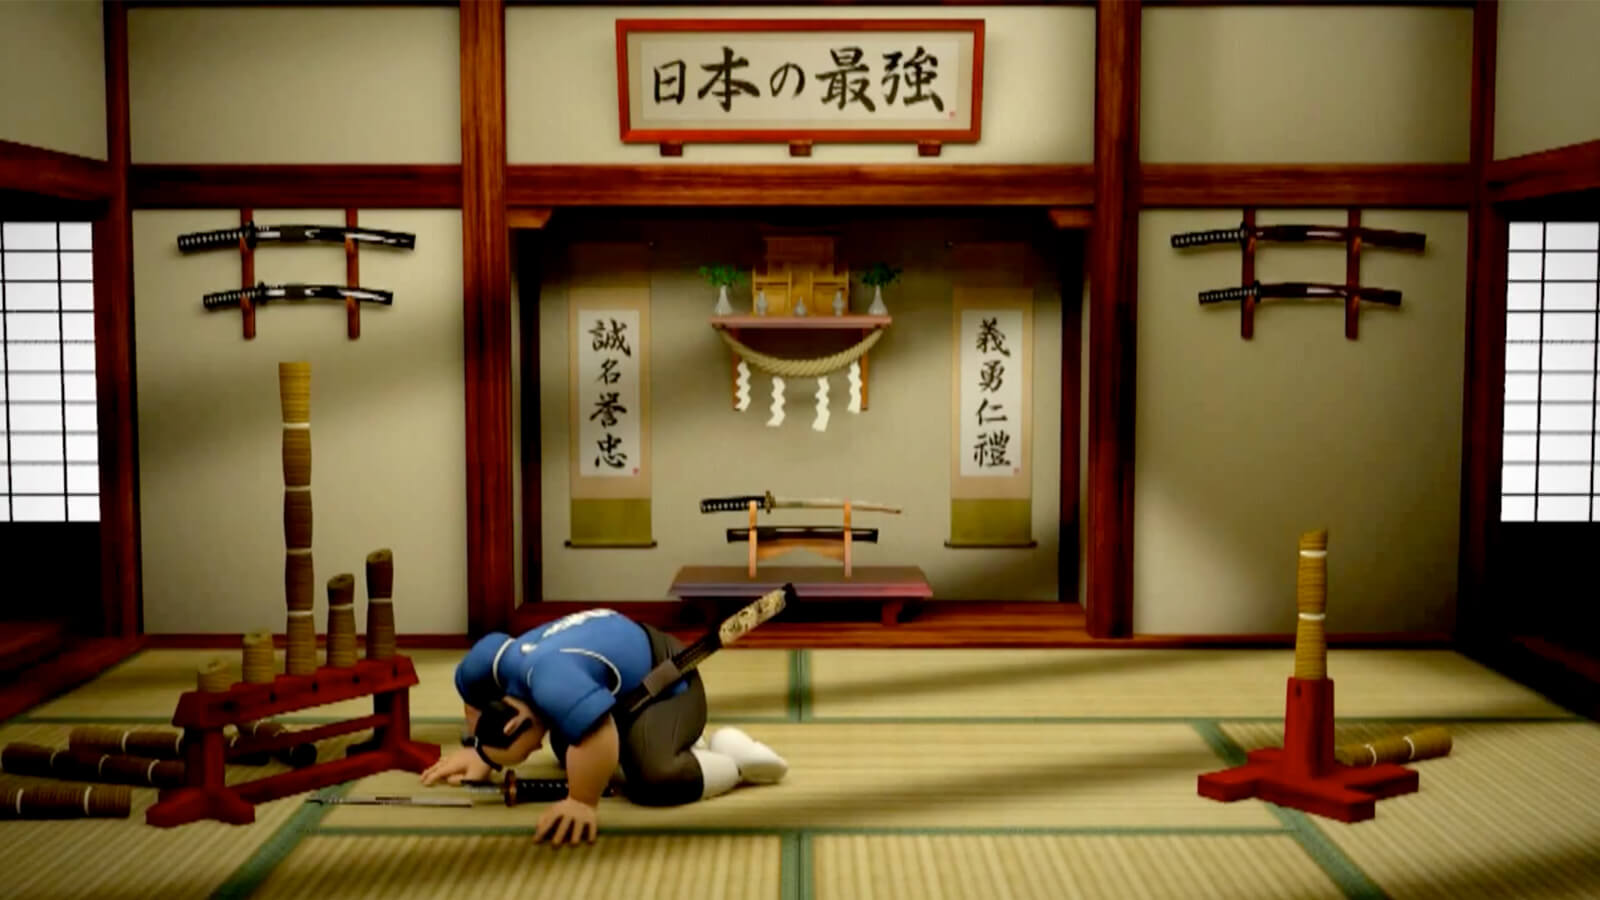 A samurai in a blue tunic kneels in defeat, his sword broken, as a single rolled-up straw mat remains standing before him.